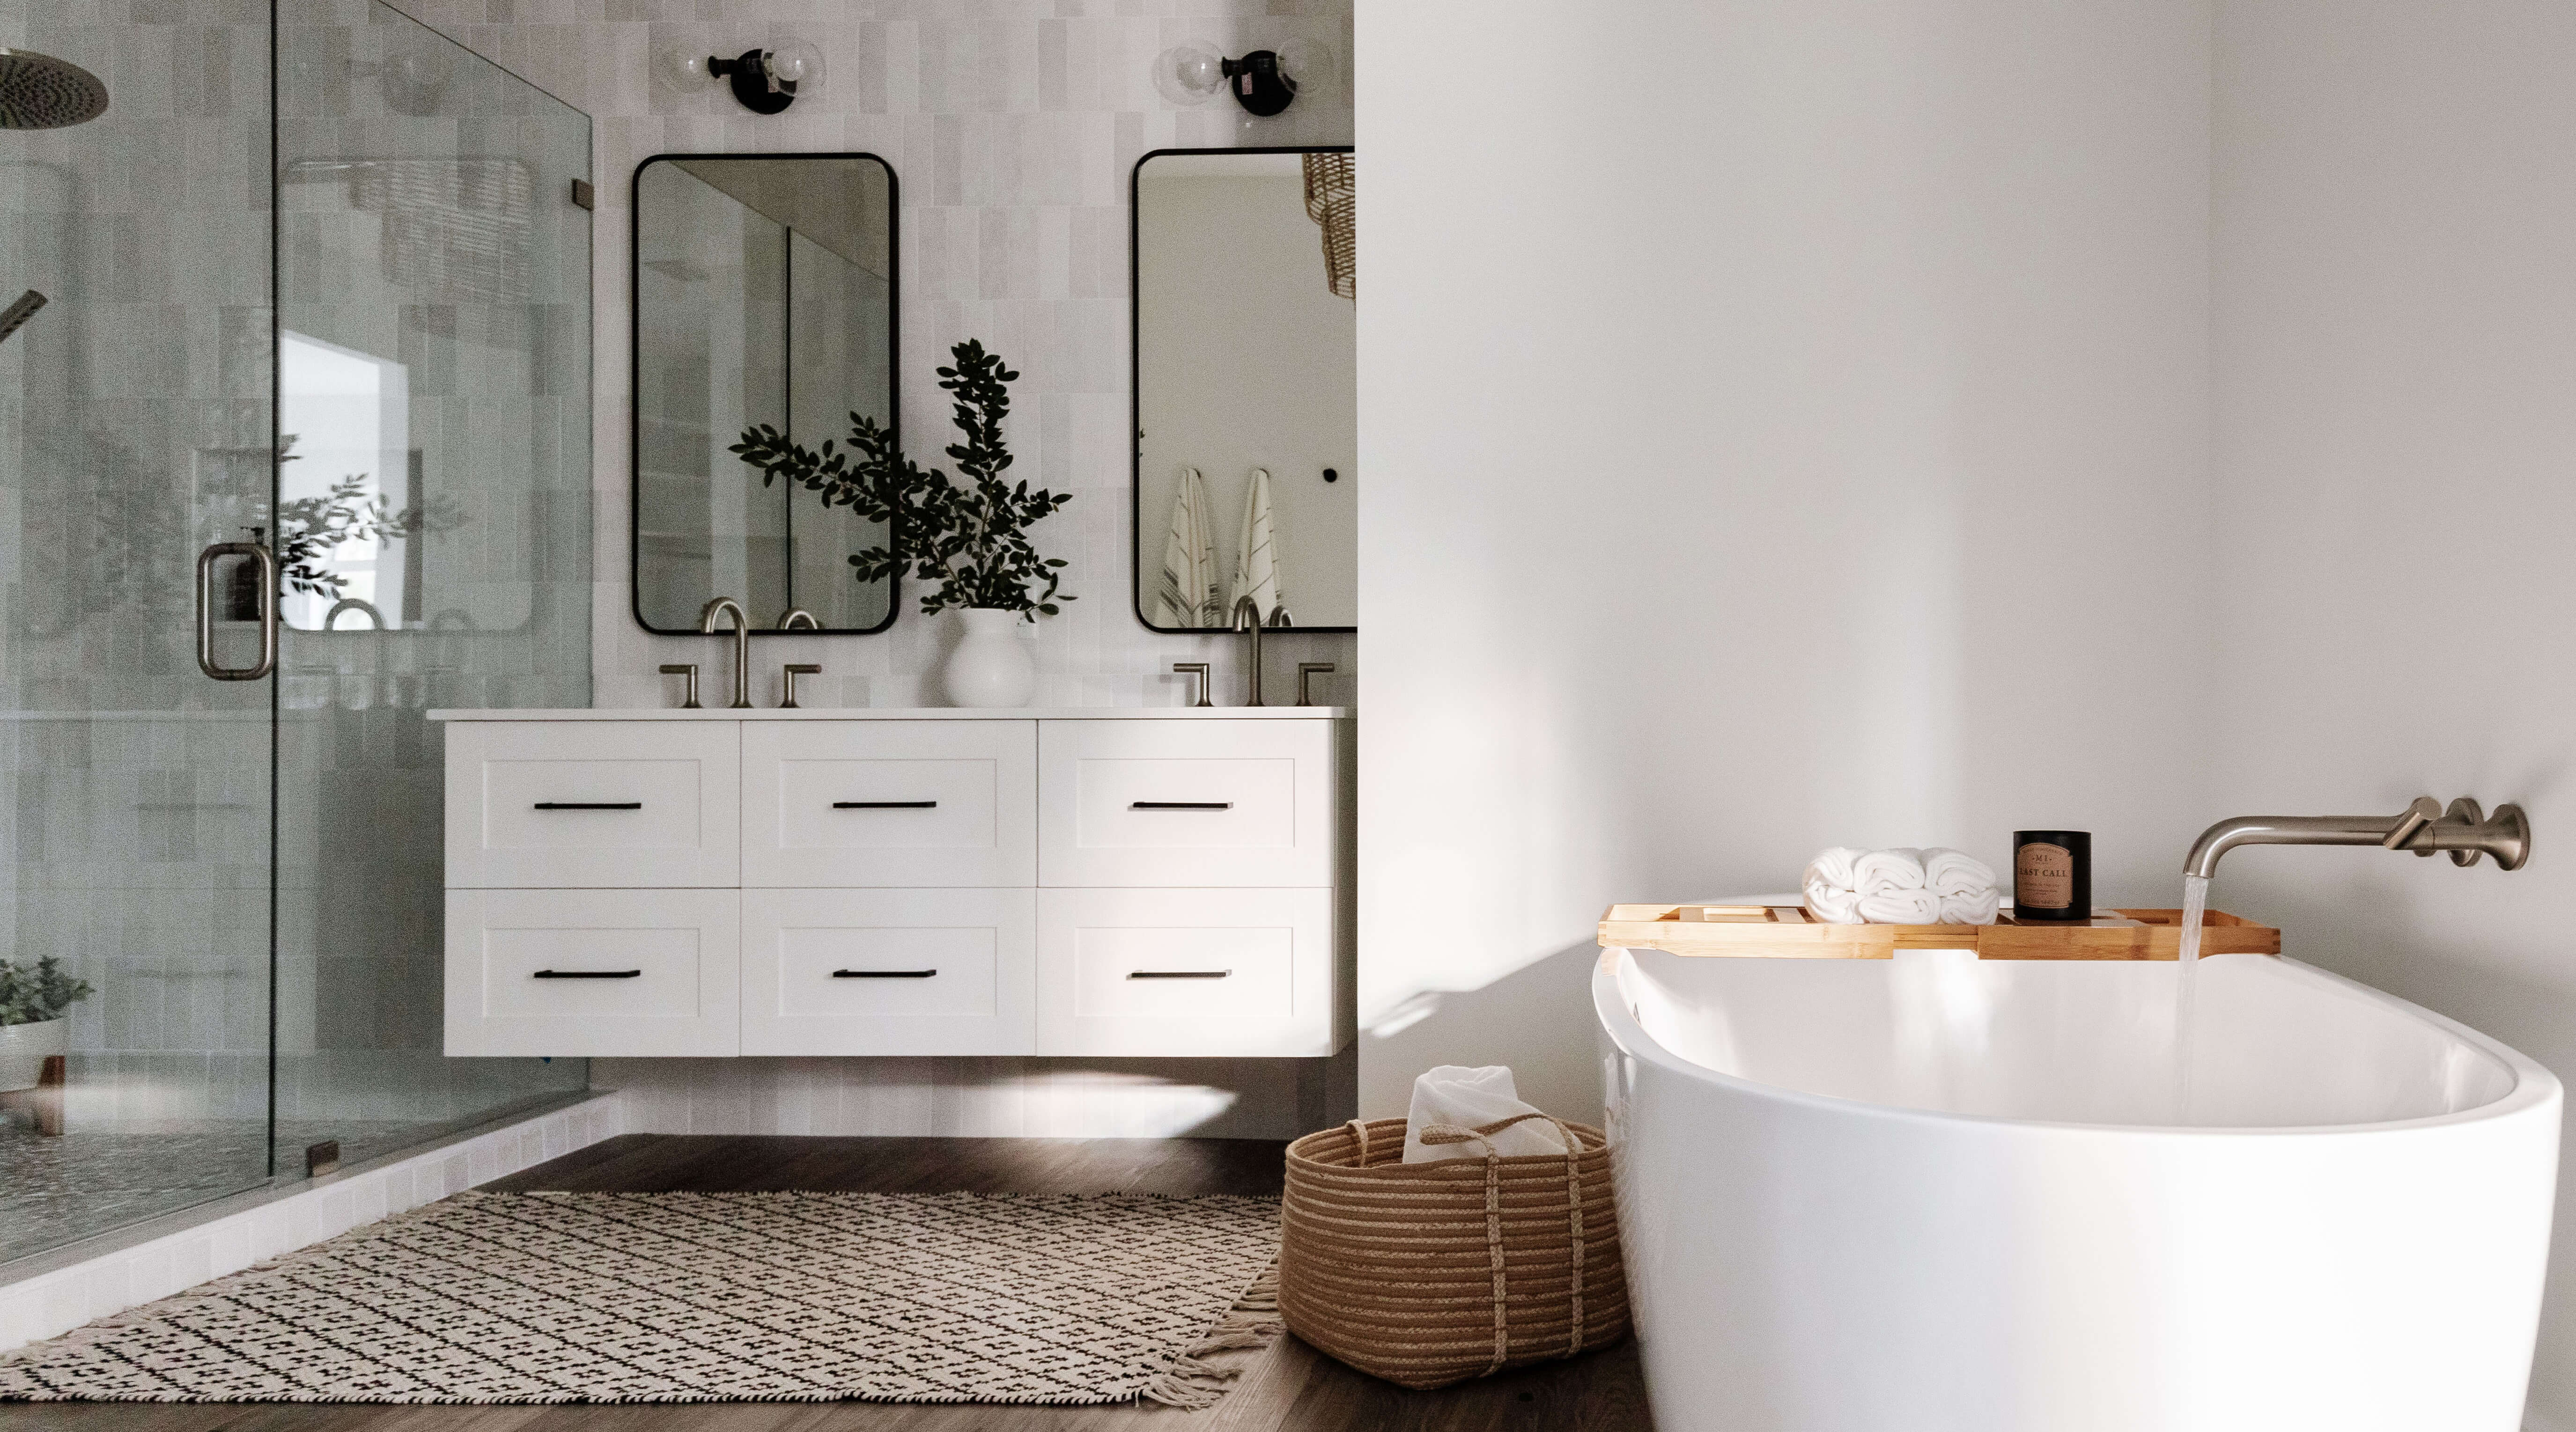 This master bathroom design features a white painted floating vanity with a pretty flat panel door style. The room has a soft, neutral color palette featuring light gray painted walls, lightly stained wood flooring, white and gray tiles, a white freestanding bathtub.